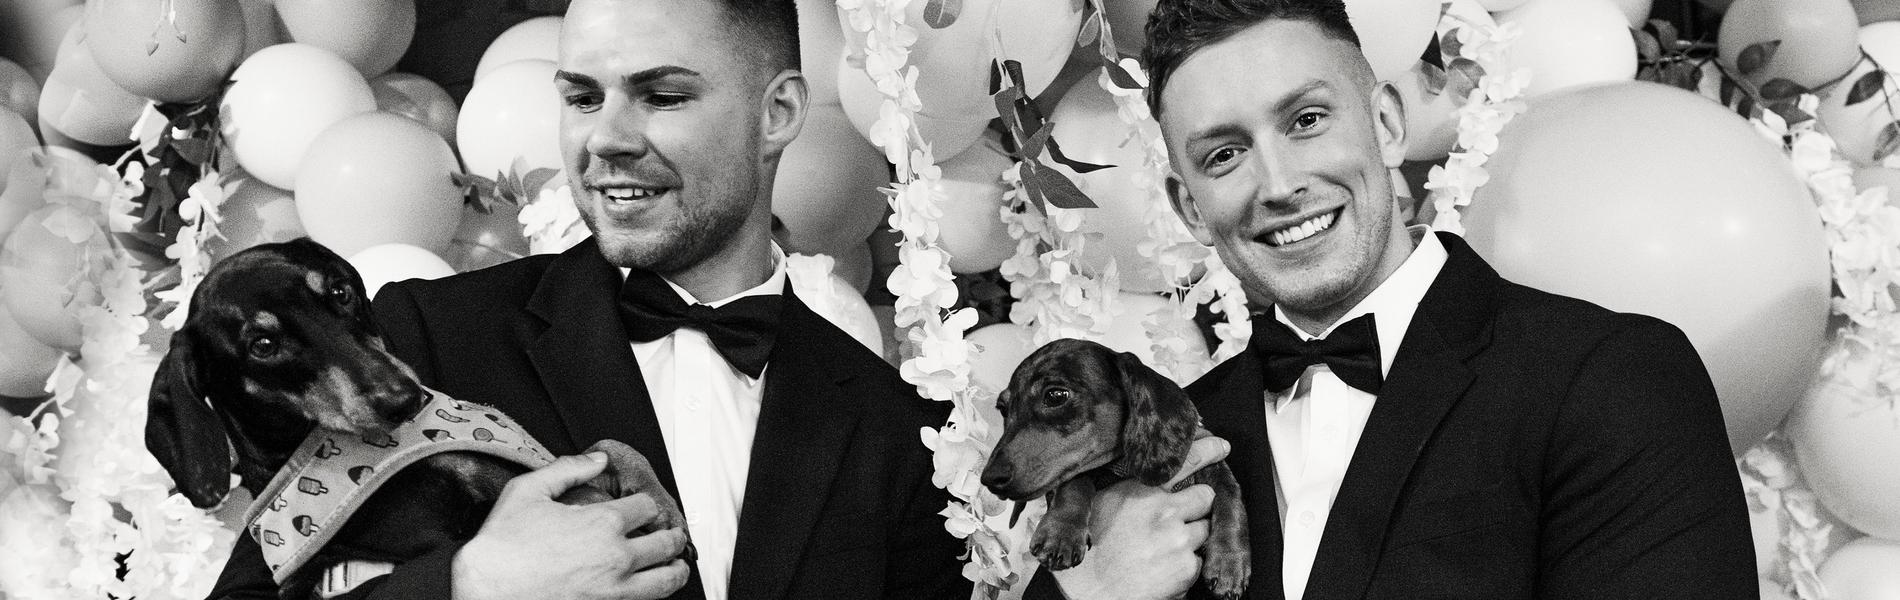 Groom and Groom holding dogs